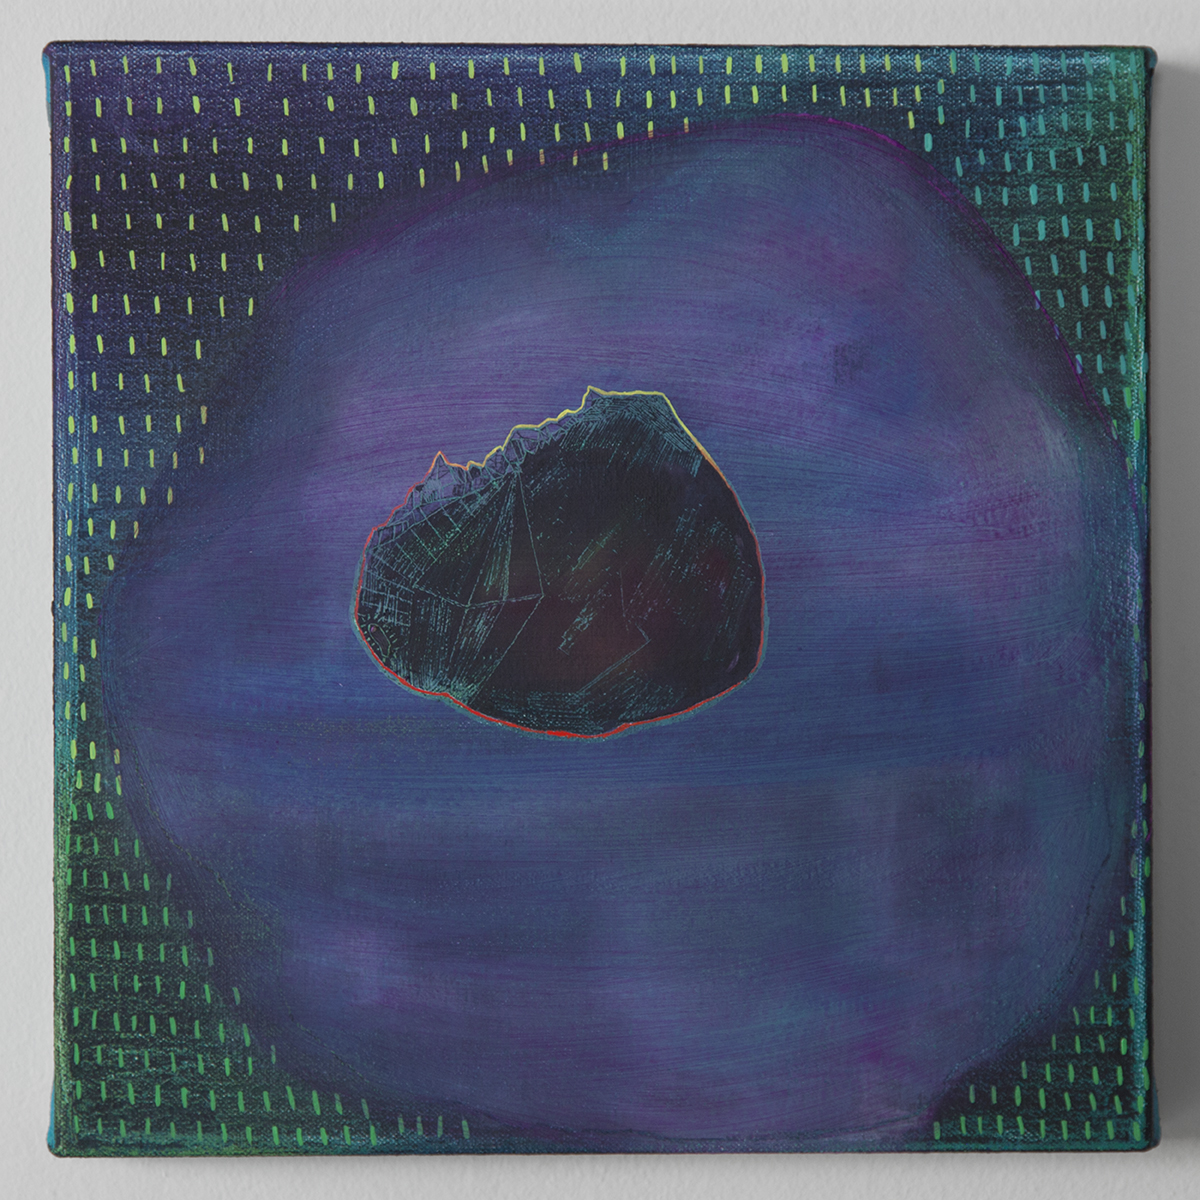  Meteorite Vision, Oil and cold wax on canvas, 9” x 9”  